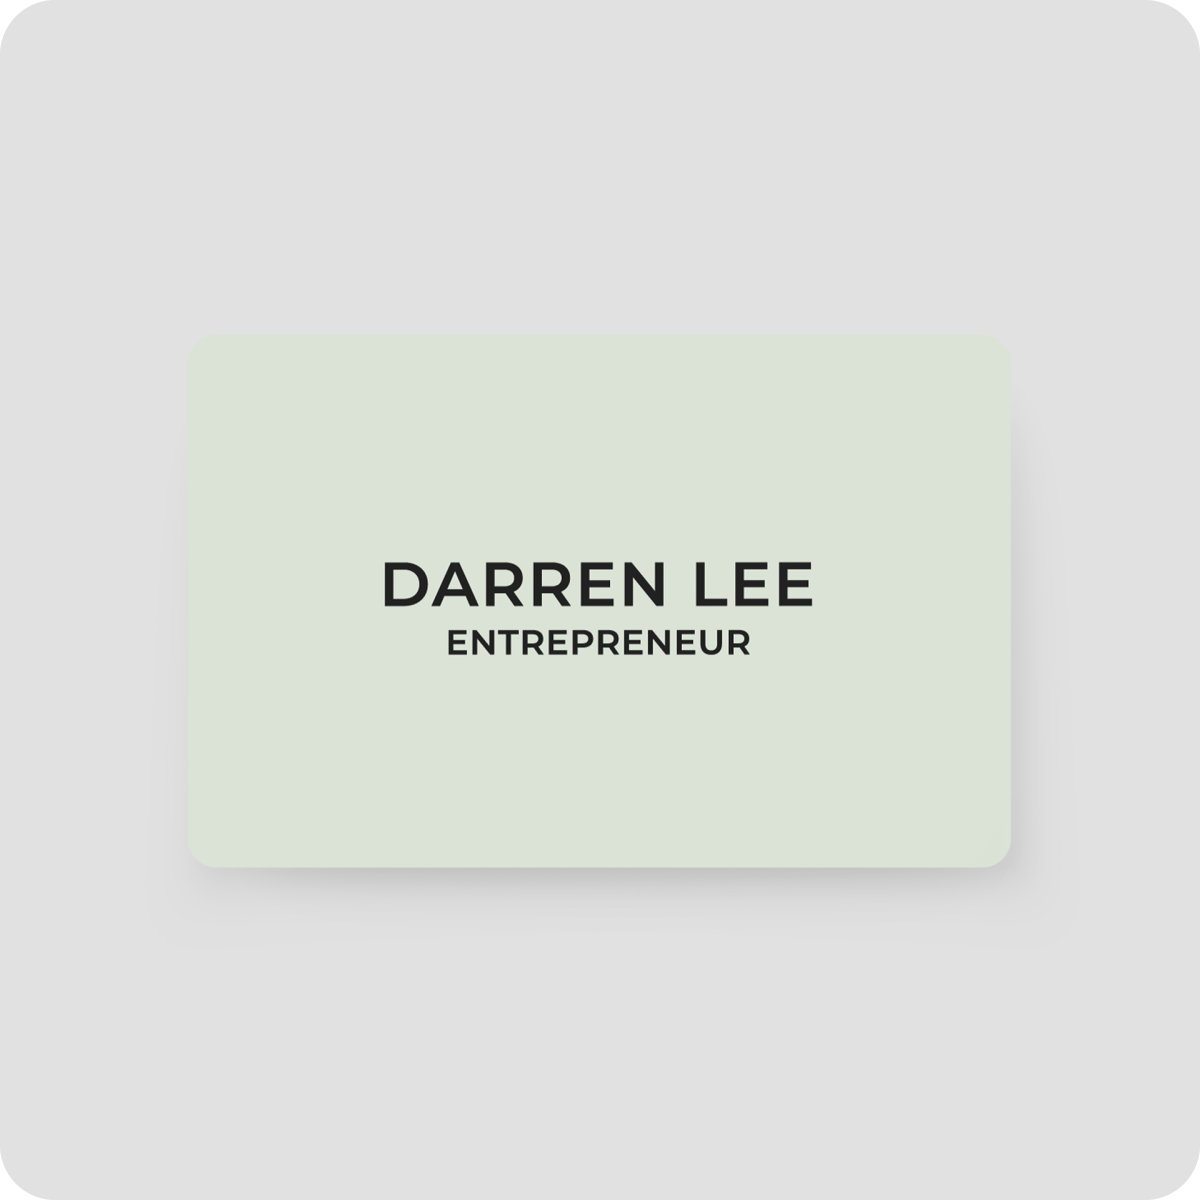 One Good Card: Smart Digital Name Card (Modern) - Personalised Near Field Communication (NFC) Digital Business Cards designs - Earth Green